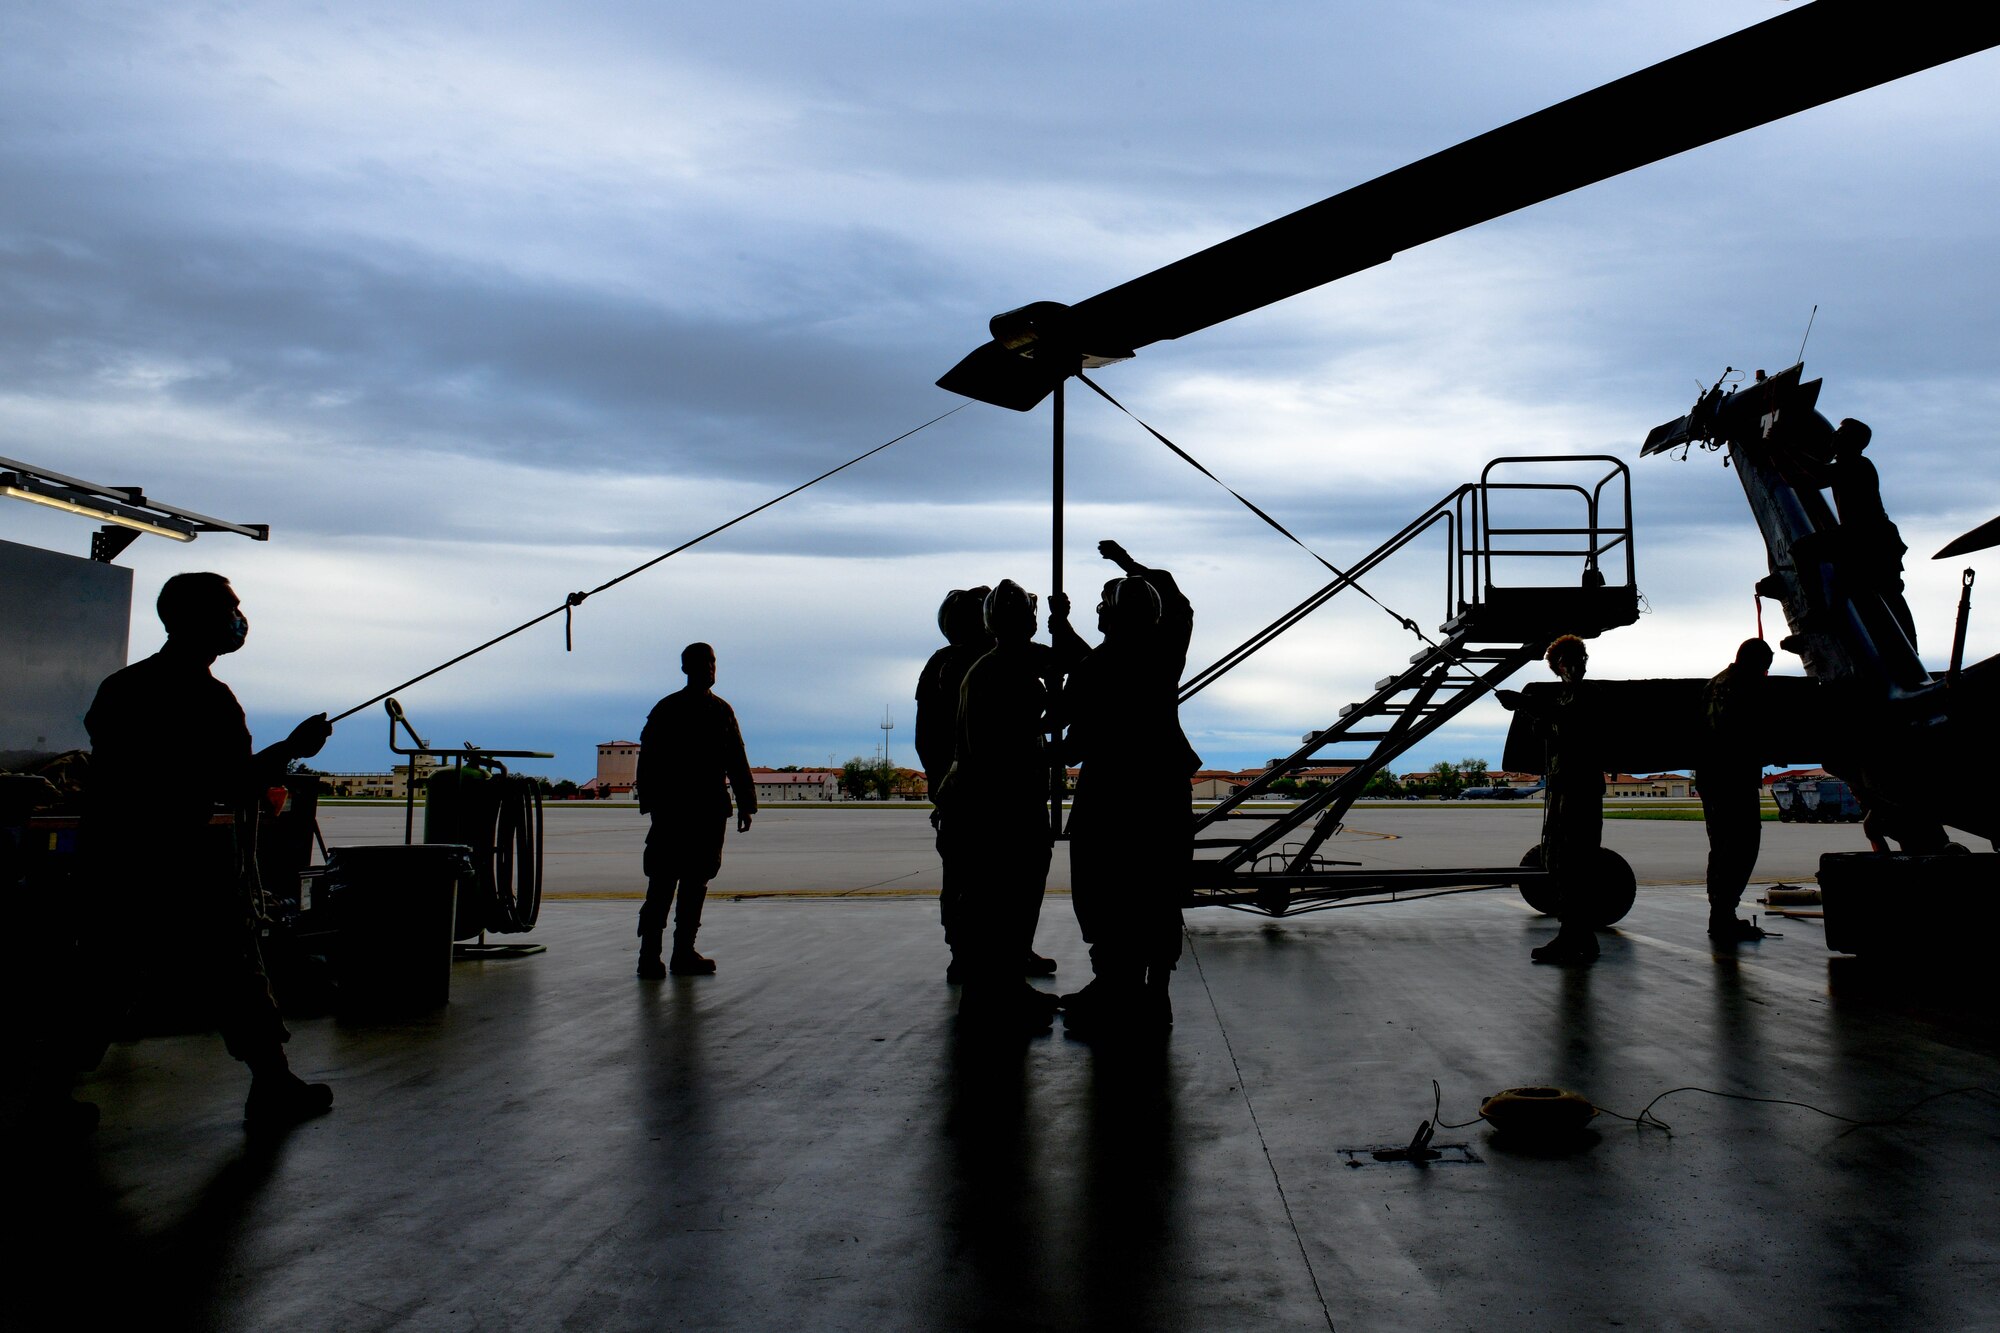 U.S. Air Force Airmen assigned to the 56th Helicopter Aircraft Maintenance Unit compete in the 3rd quarter Rapid Aircraft Generation and Employment (RAGE) event at Aviano Air Base, Italy, Oct. 7, 2021. The 31st Fighter Wing hosts the 56th Rescue Squadron providing a rapidly-deployable, worldwide combat rescue and reaction force response utilizing HH-60G Pave Hawk helicopters. (U.S. Air Force photo by Senior Airman Brooke Moeder)